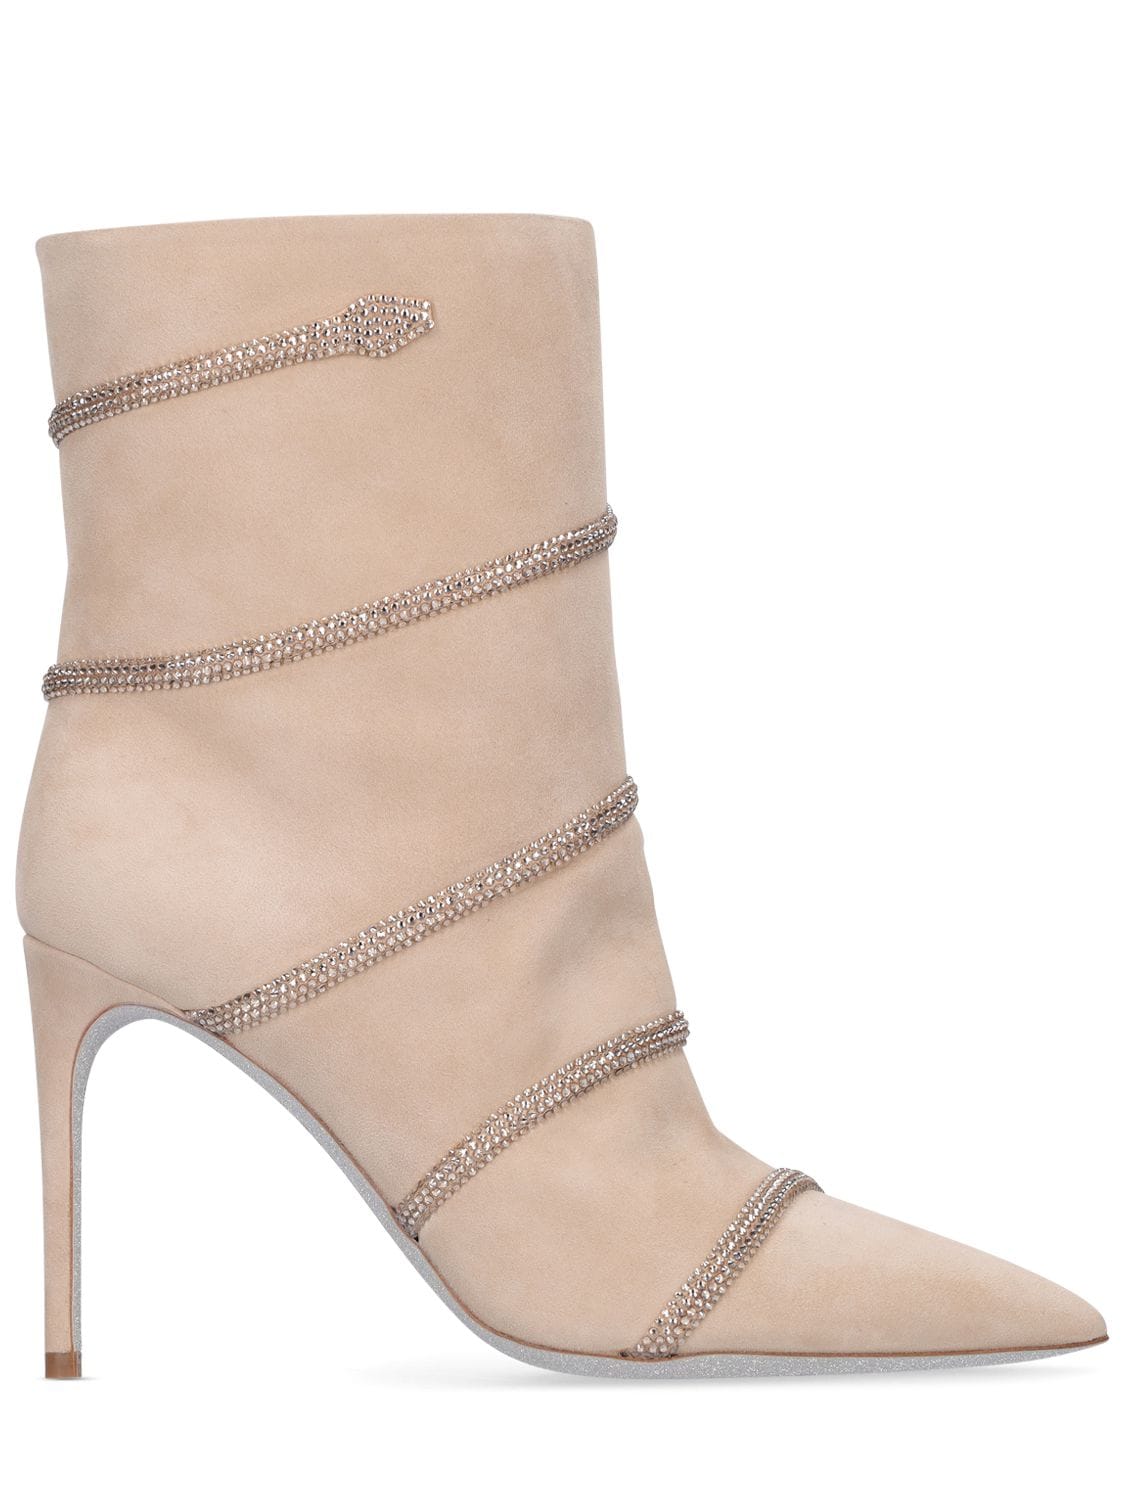 René Caovilla 100mm Suede Ankle Boots In Neutral